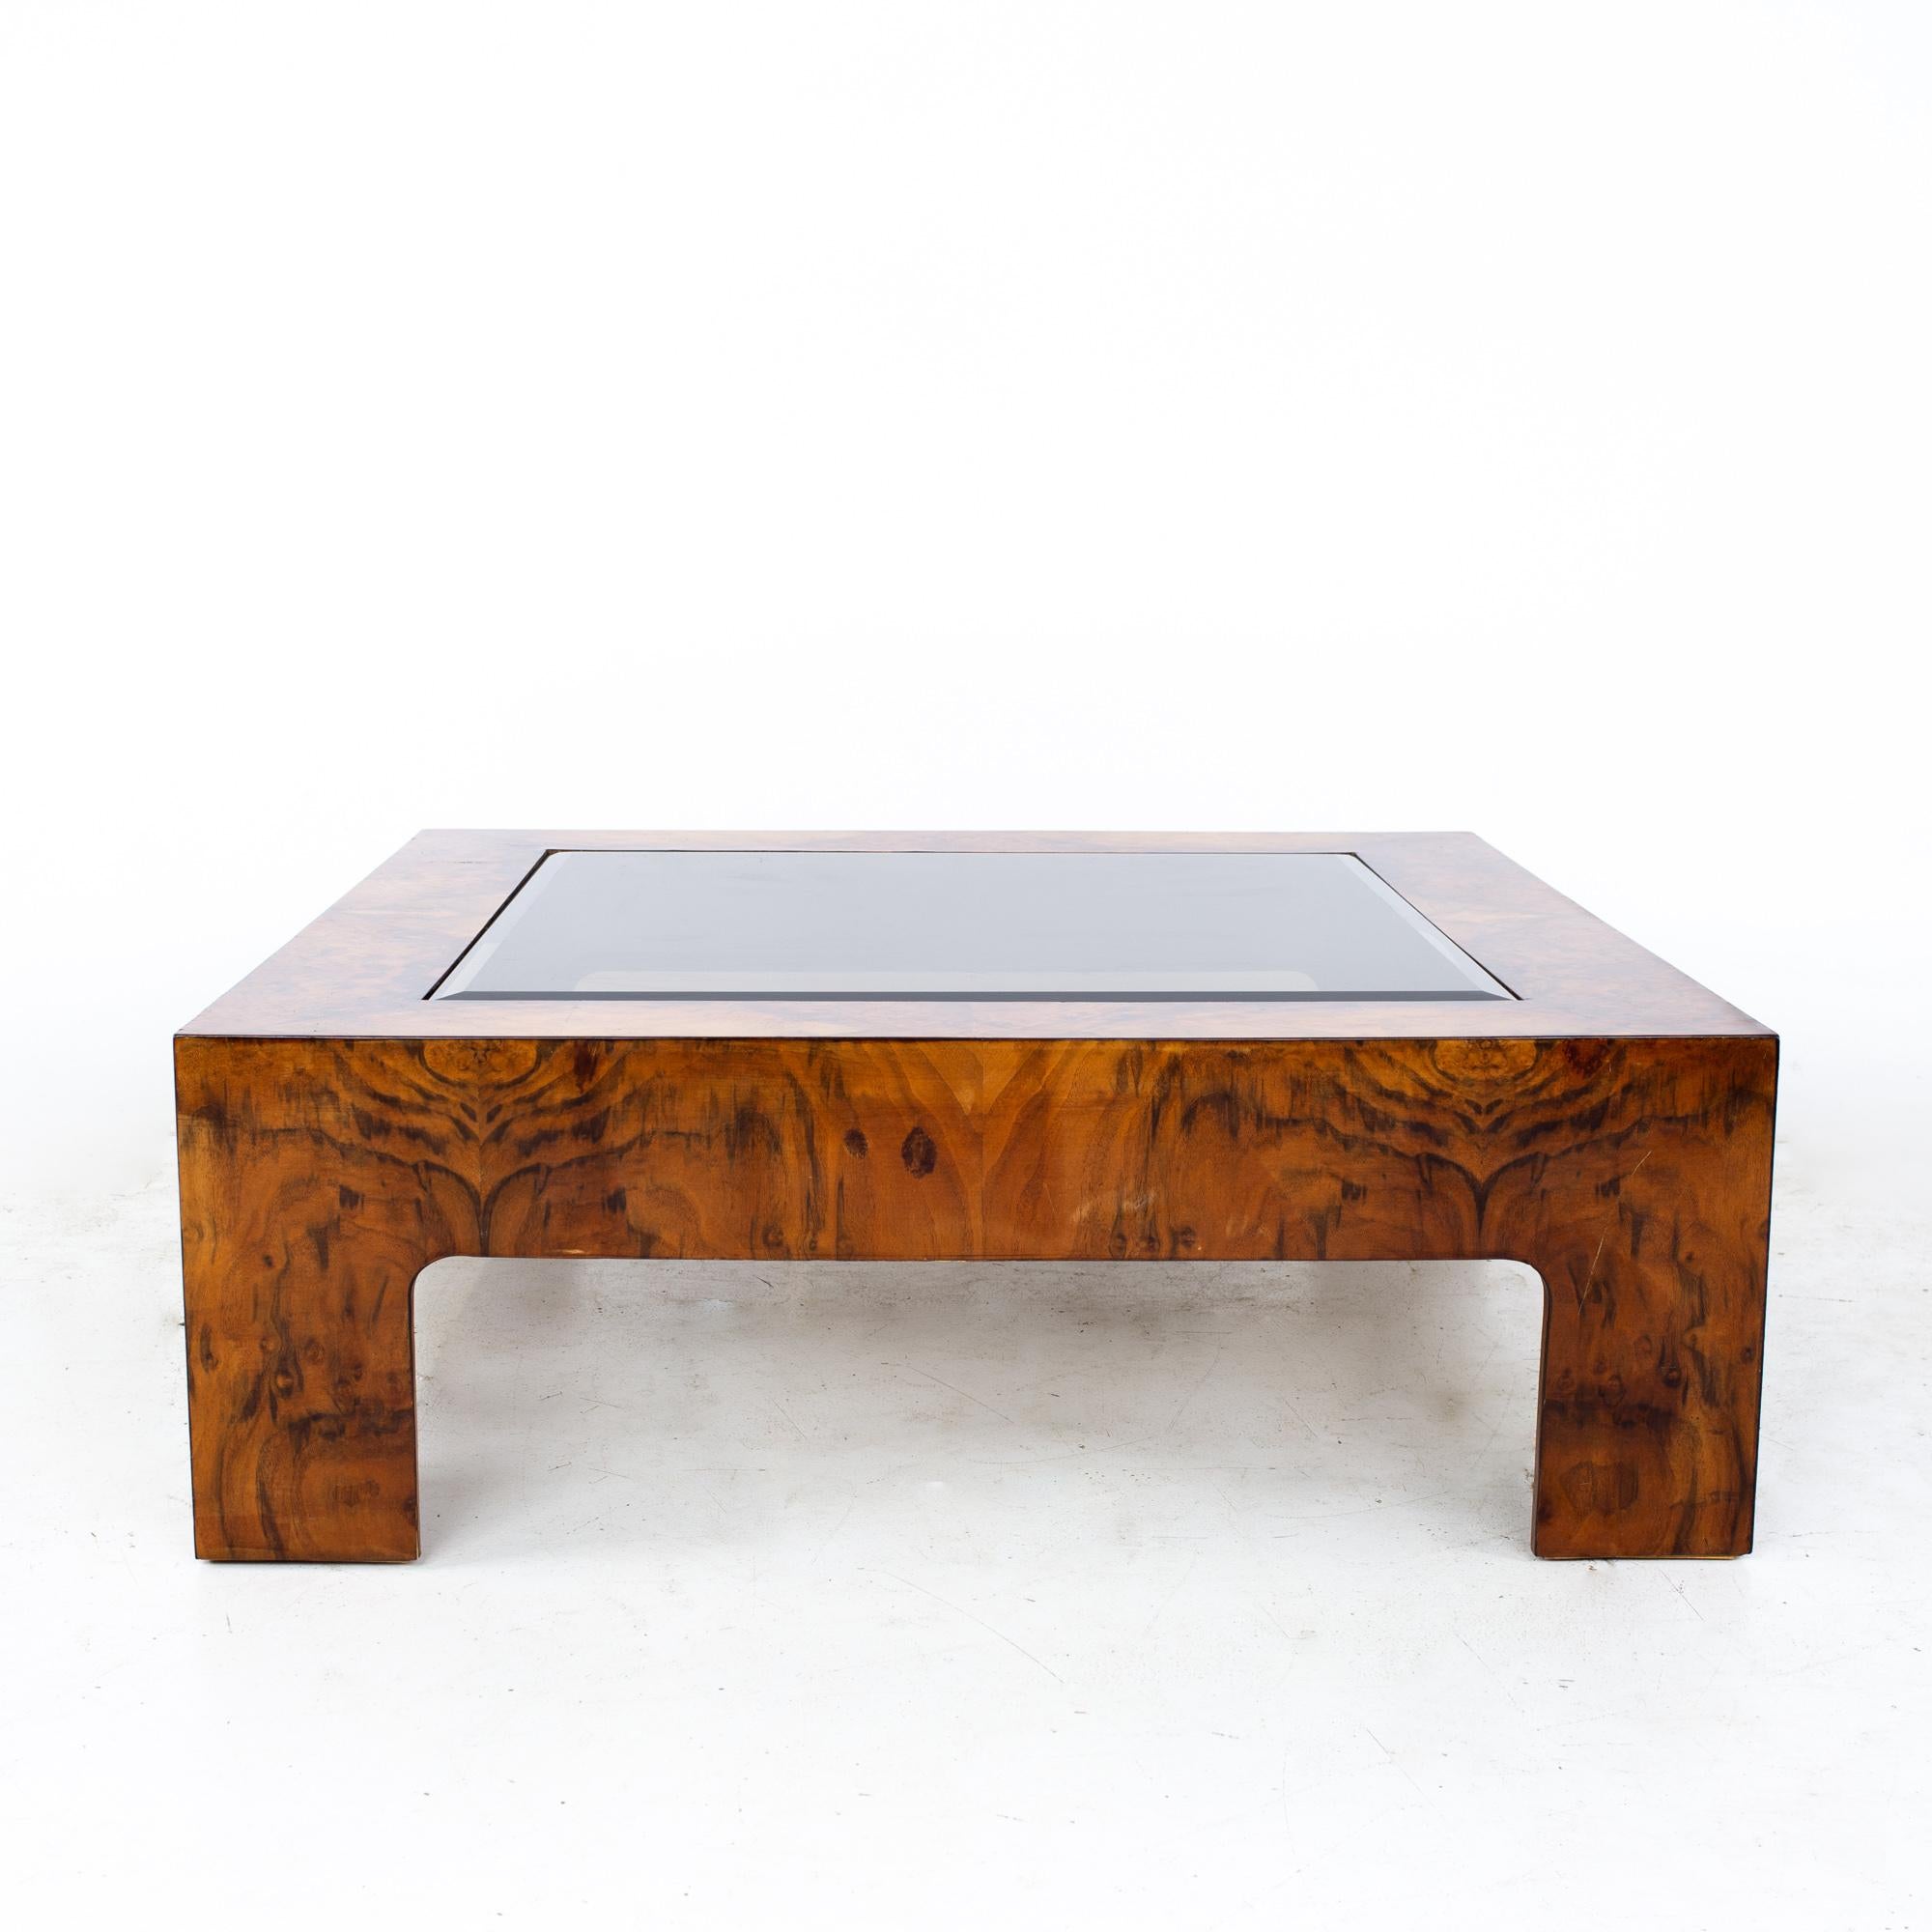 Milo Baughman style mid century burlwood and glass square coffee table
Coffee table measures: 44 wide x 44 deep x 15.25 inches high

All pieces of furniture can be had in what we call restored vintage condition. That means the piece is restored